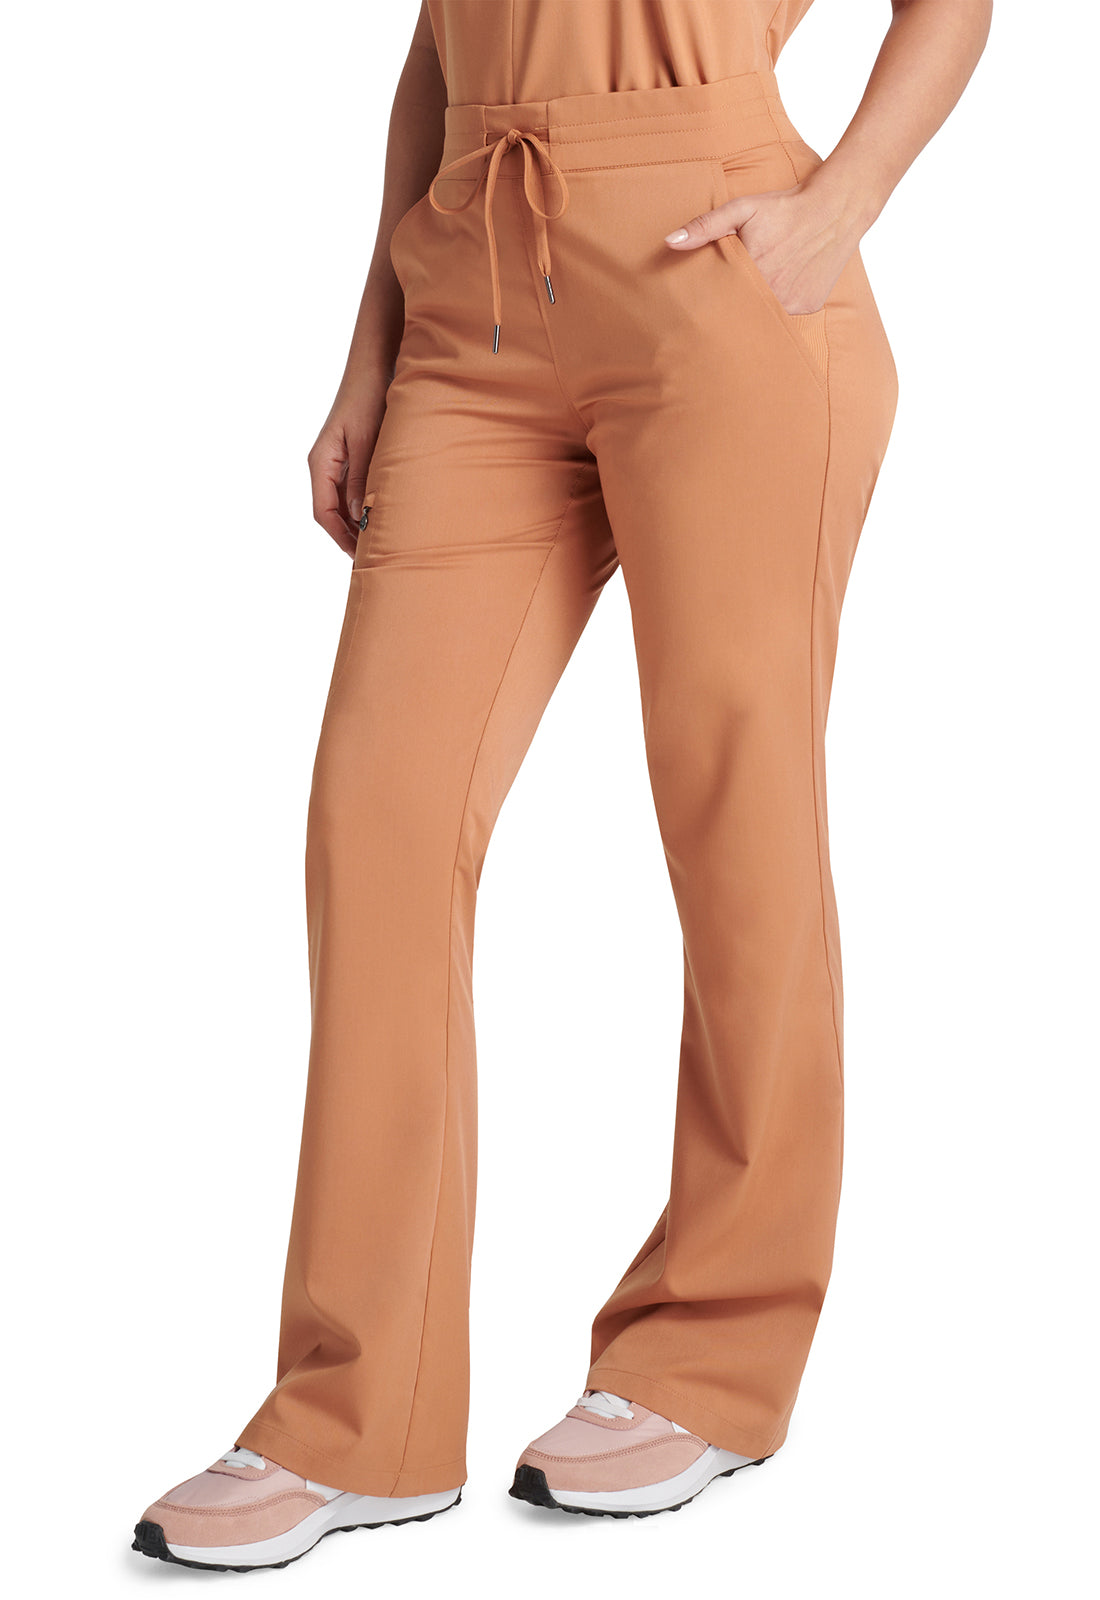 Healing Hands Limited Edition Boot Cut Pant (2 Colors) – Berani Femme  Couture Scrubwear & Medical Supply